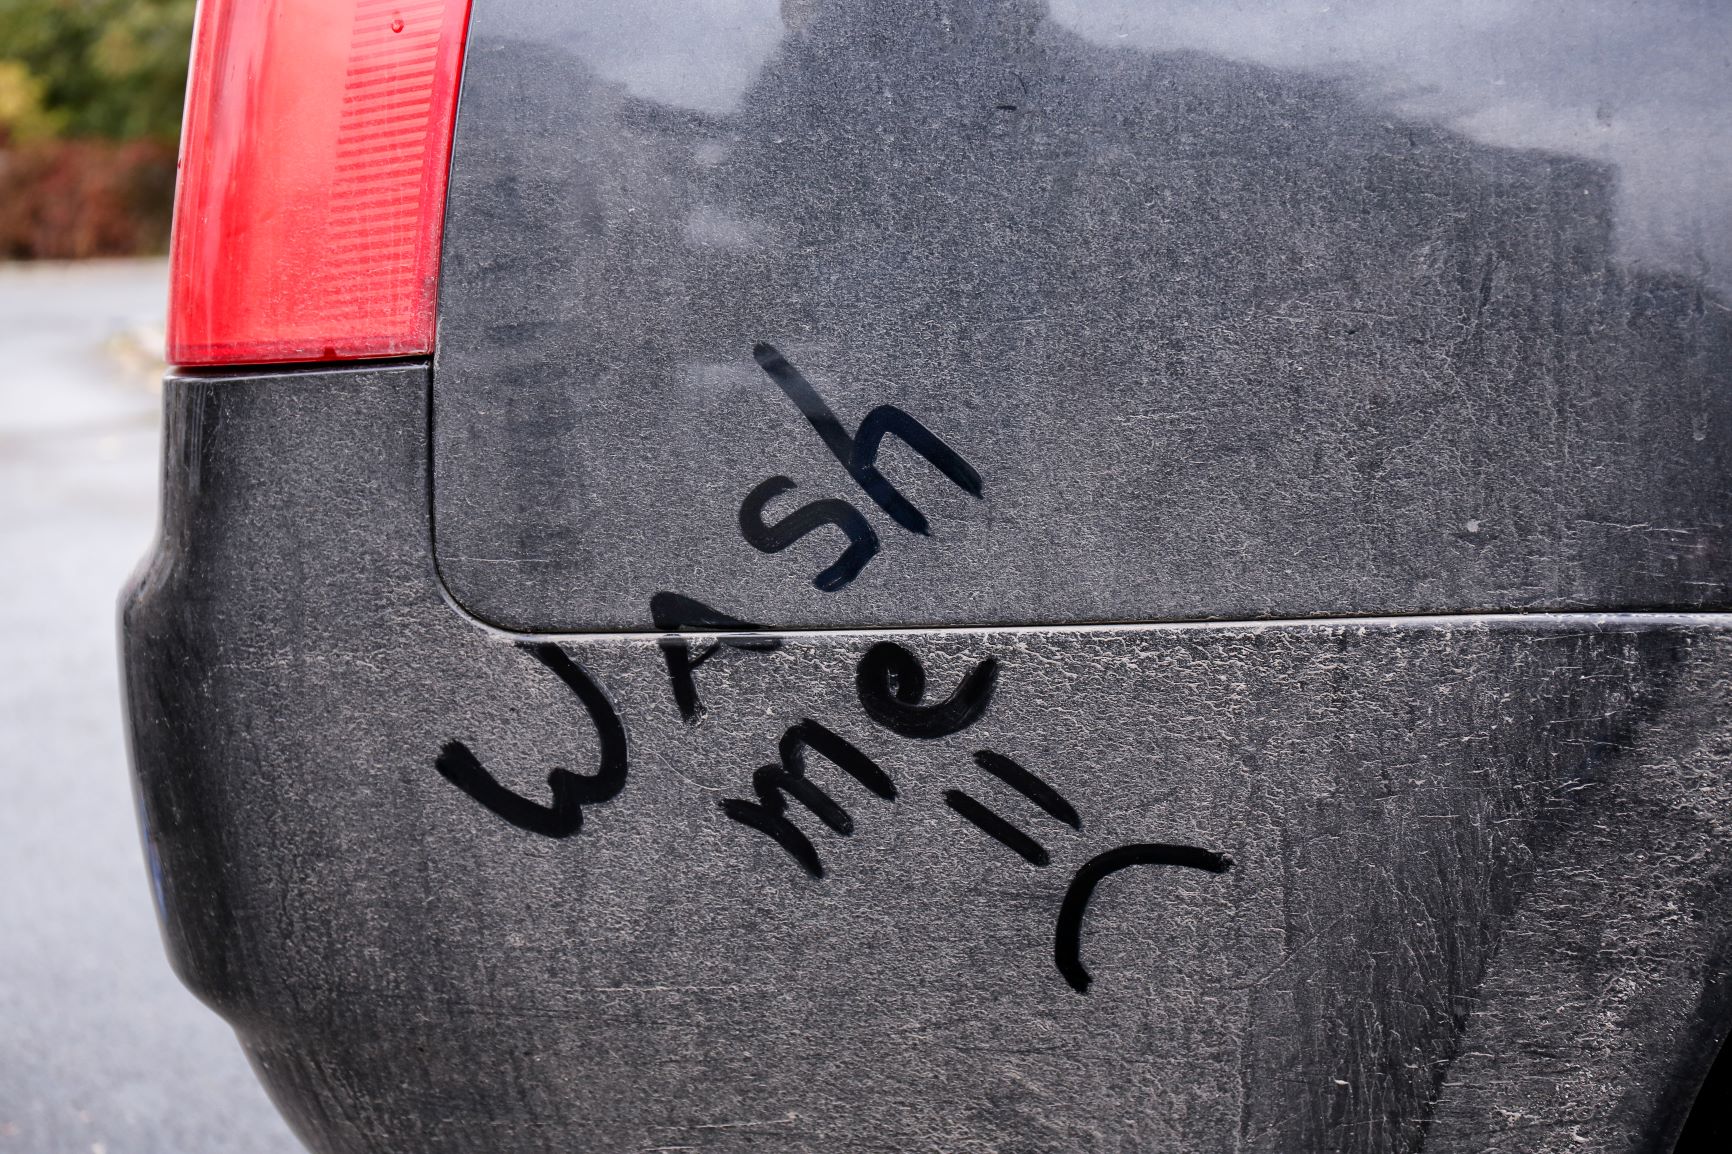 dirty car with "wash me" written in the grime